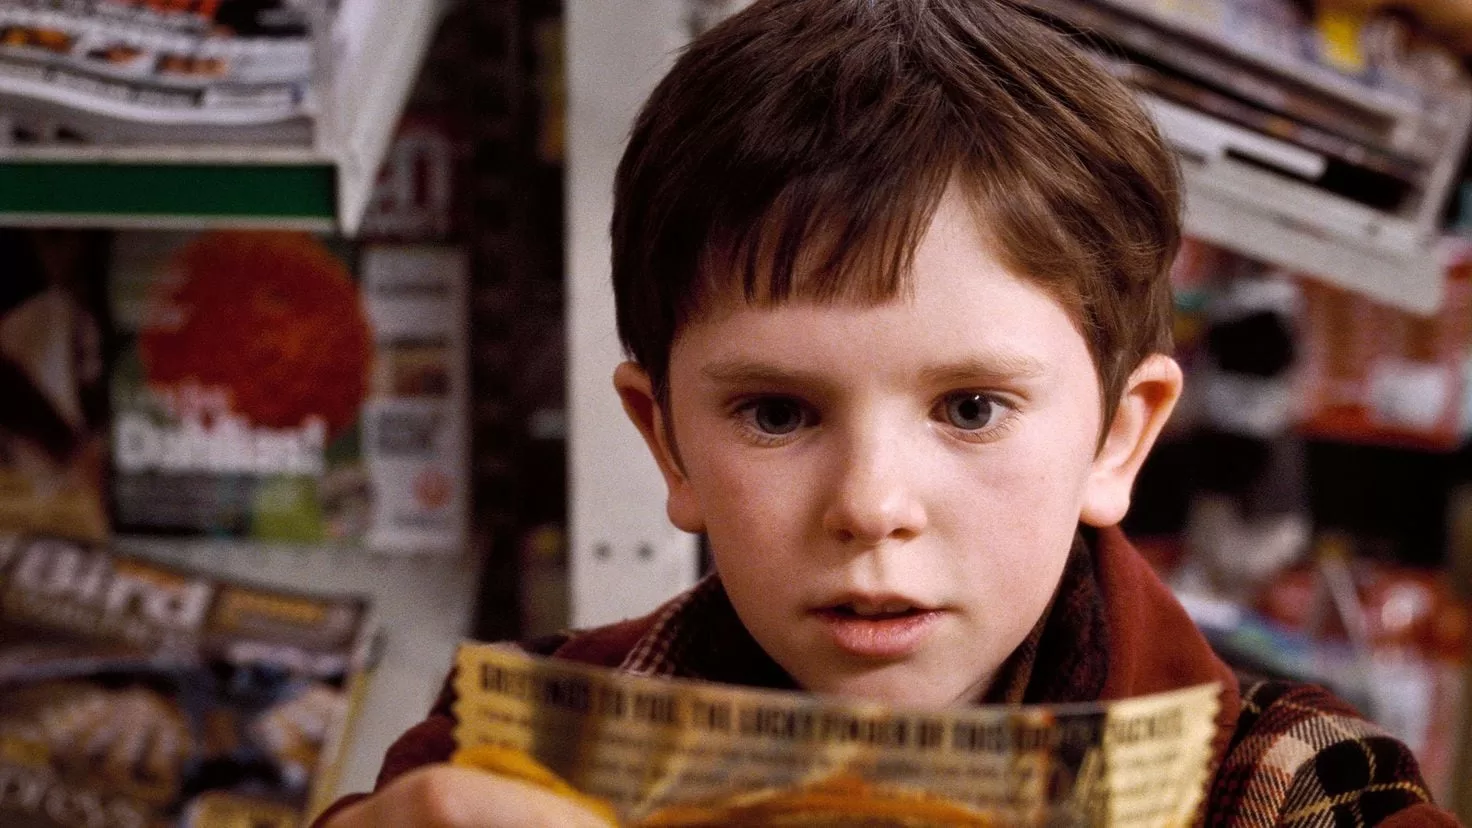 What happened to the boy from Charlie and the Chocolate Factory?
